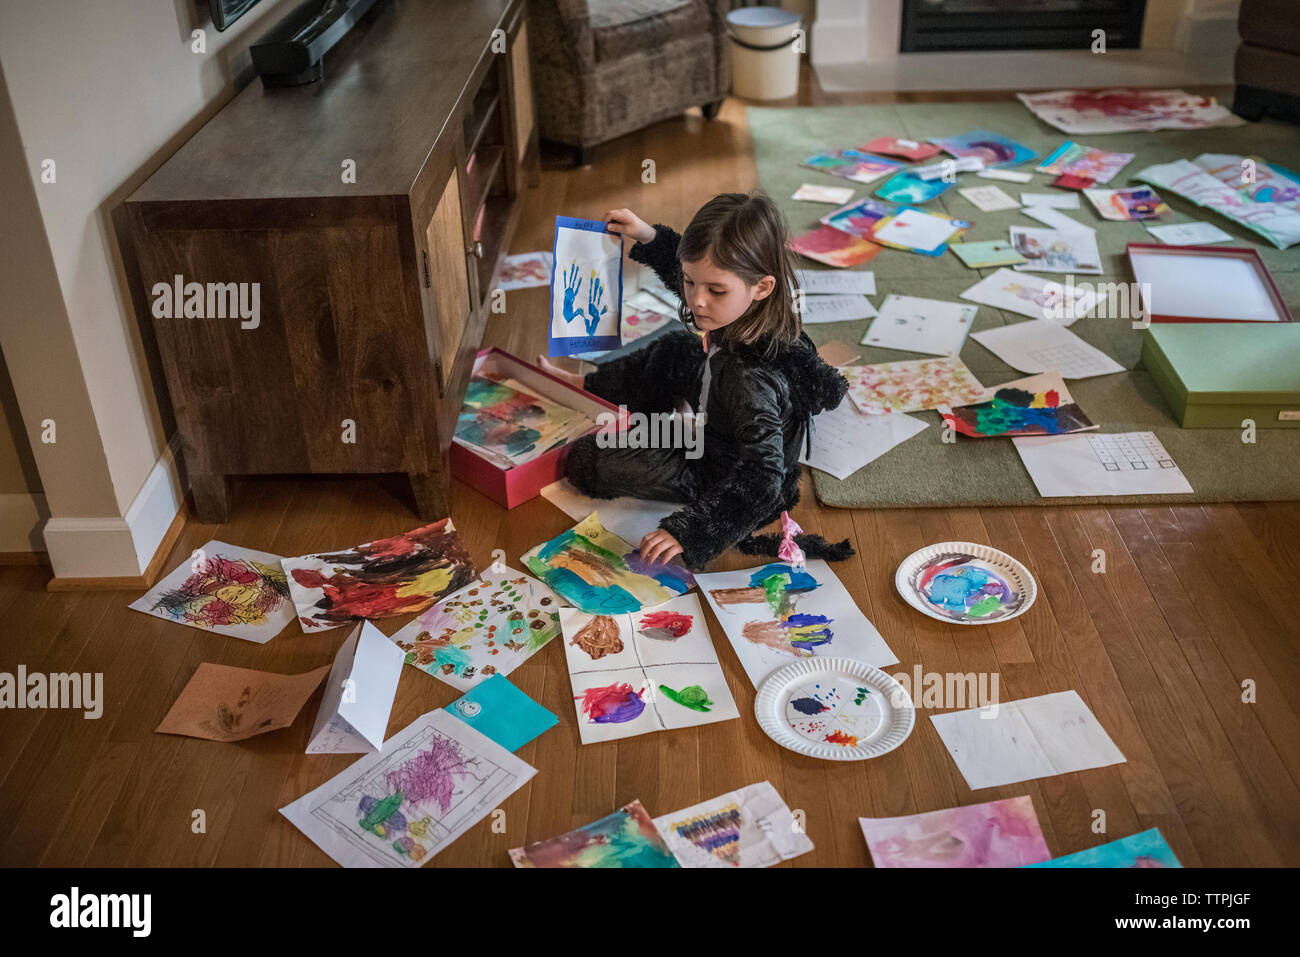 High angle view of girl painting on papers while sitting on floor at home Stock Photo